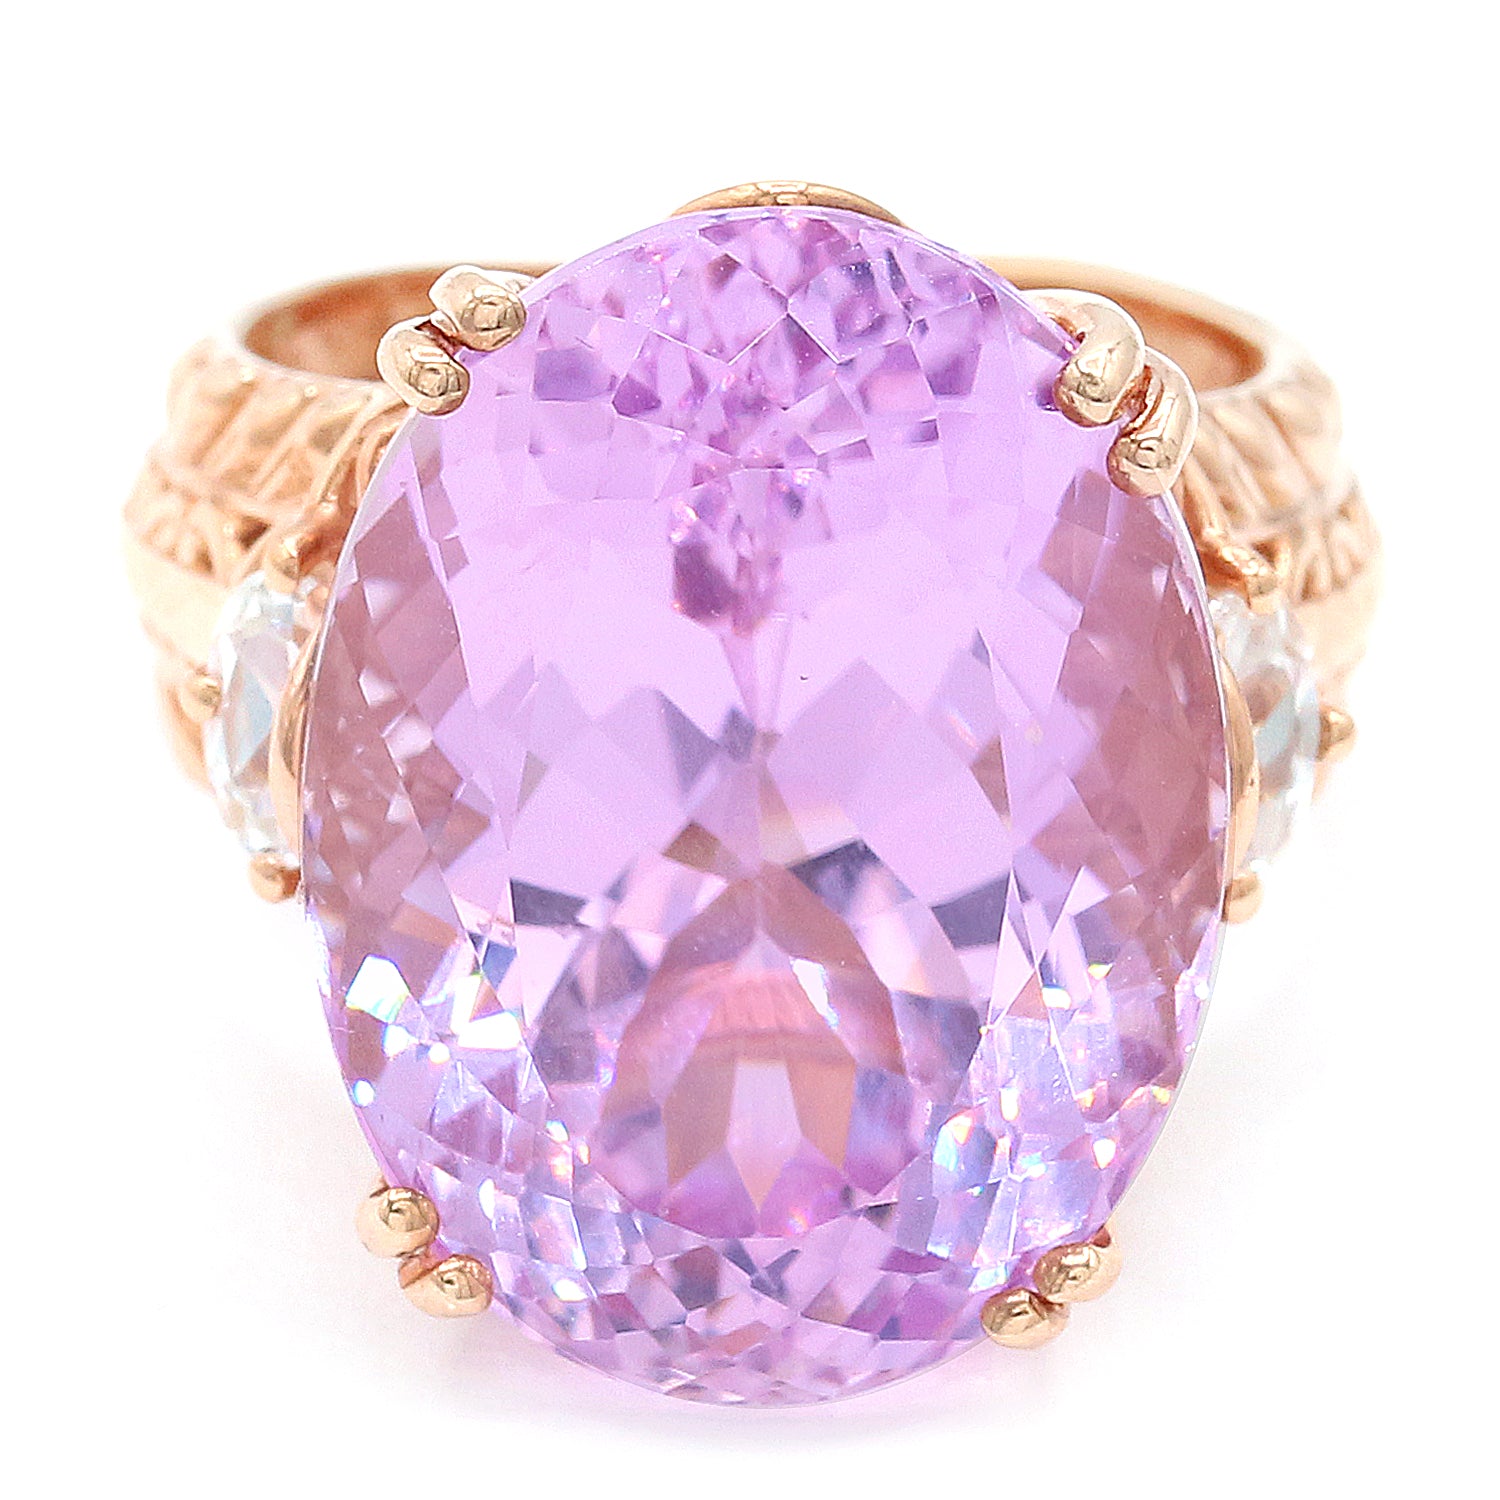 Limited Edition Gems en Vogue Luxe, One-of-a-Kind 24.78ctw Kunzite & White Zircon Ring